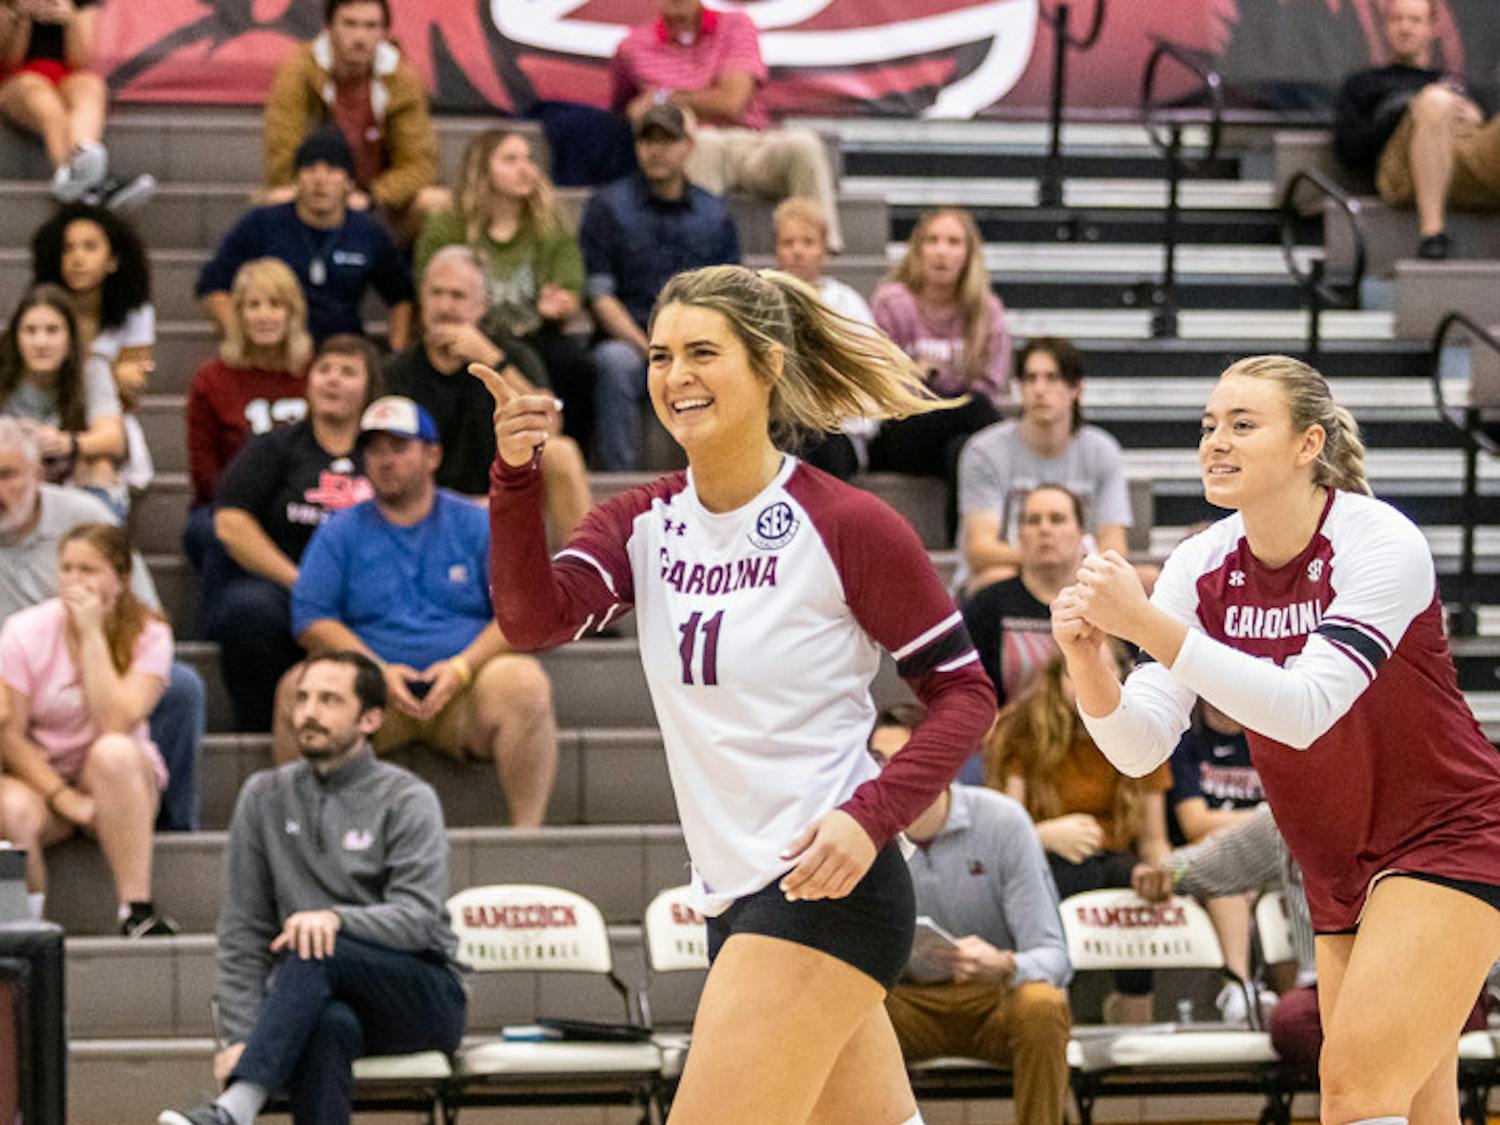 Graduate libero Jenna Hampton and junior outside hitter Riley Whitesides celebrate with their teammates after a successful rally on Nov. 6, 2022. The Gamecocks defeated the Ole Miss Rebels 3-1.&nbsp;